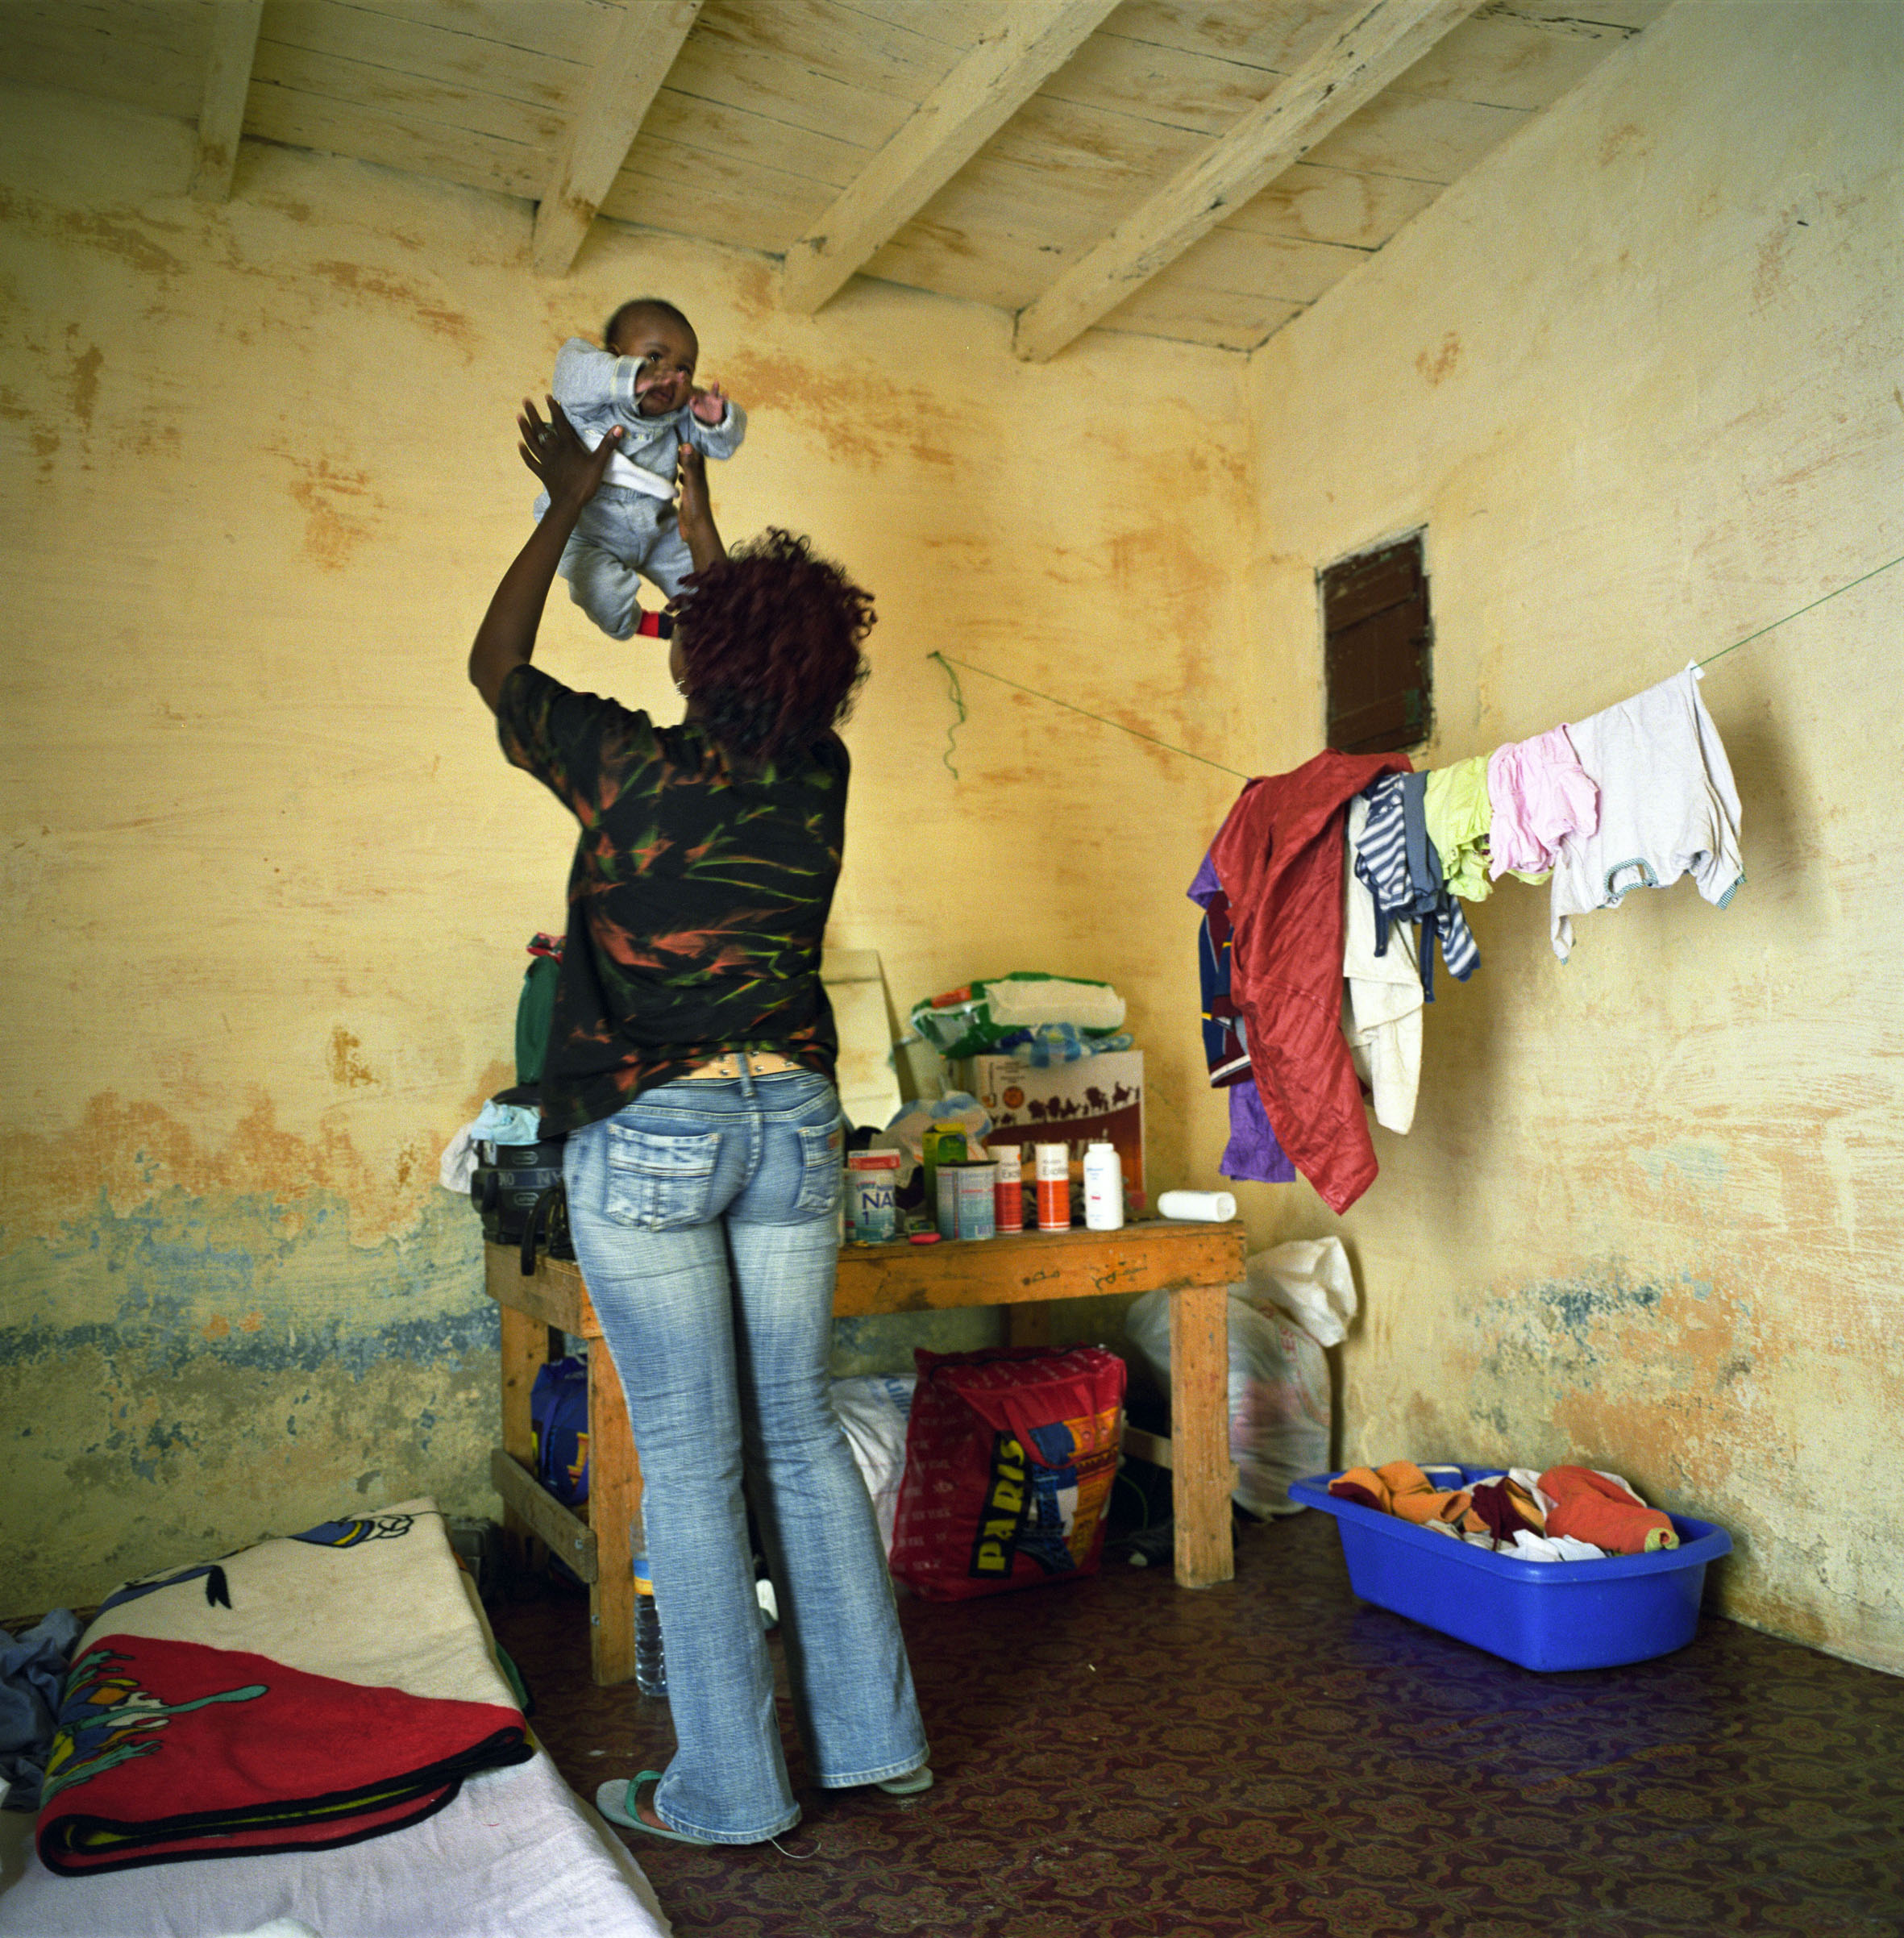 Sylla, 28, an immigrant from Kongo, has been living for one year in Mauritania with her 3-month-old baby after leaving her country due to a violent situation which left her husband dead. Trying to collect the money to make the trip to Europe, she works as a laborer in houses while she is getting some help from a Nigerian priest who runs a Catholic mission. She pays €18 rent for her makeshift shelter in Nouadhibou (Mauritania).